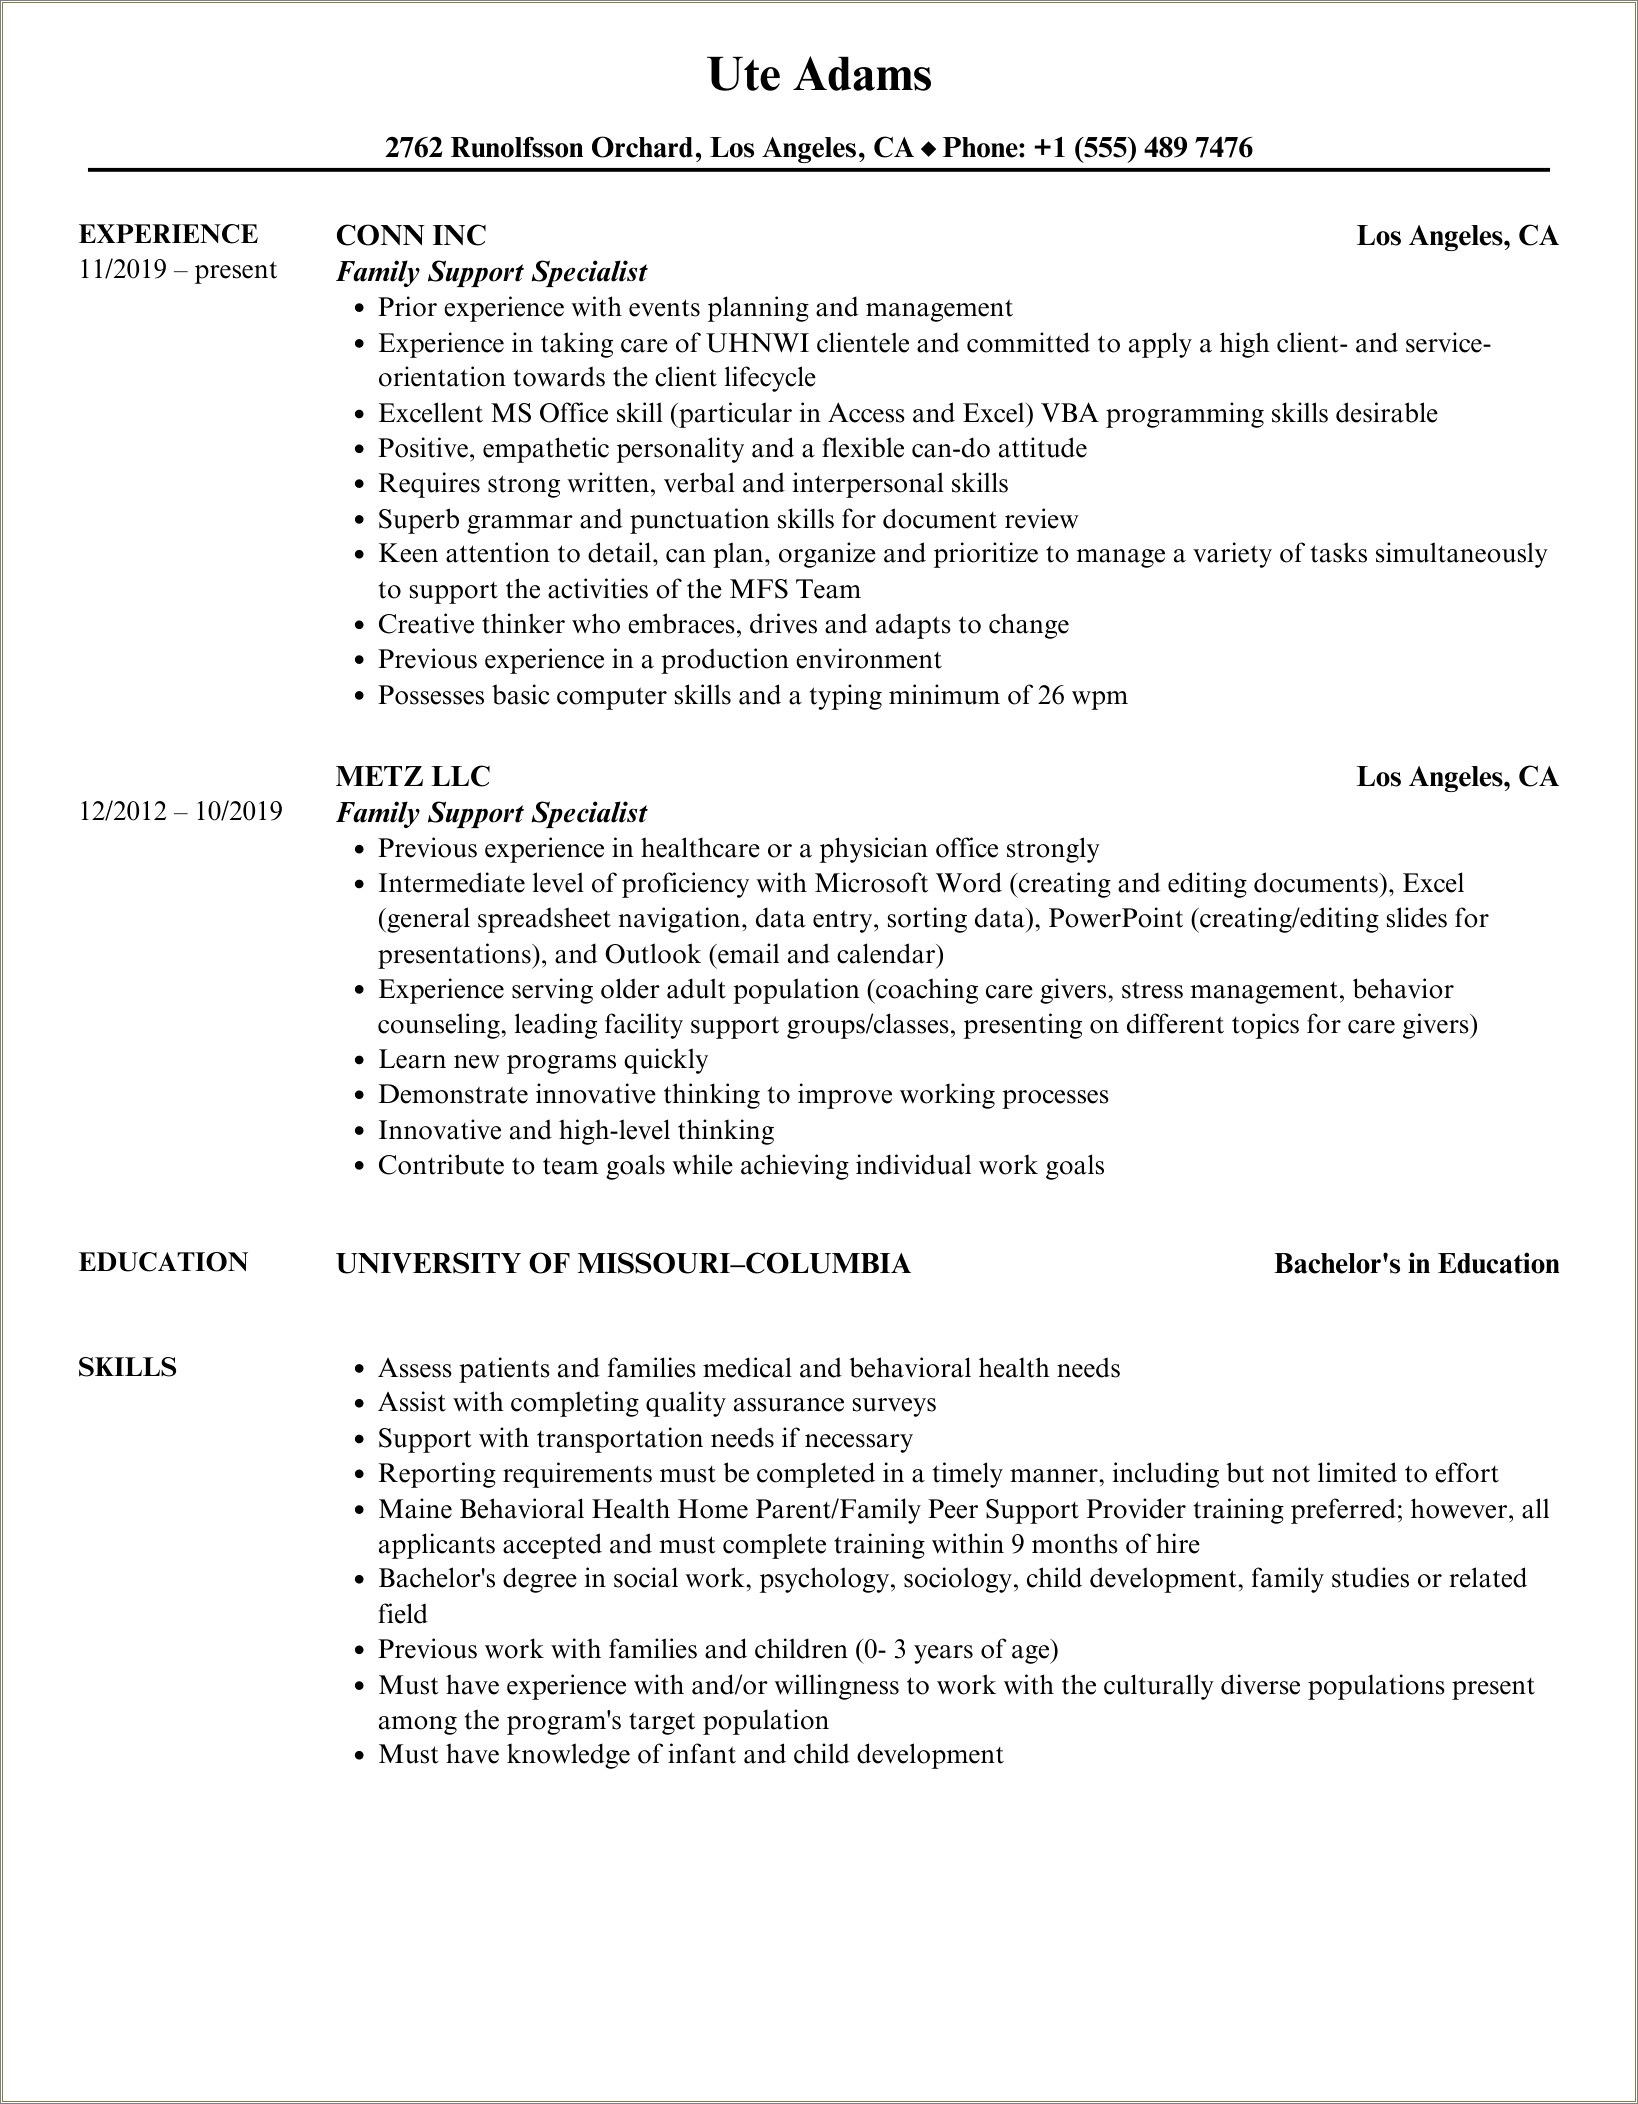 Resume Objective Examples For Family Speciallist